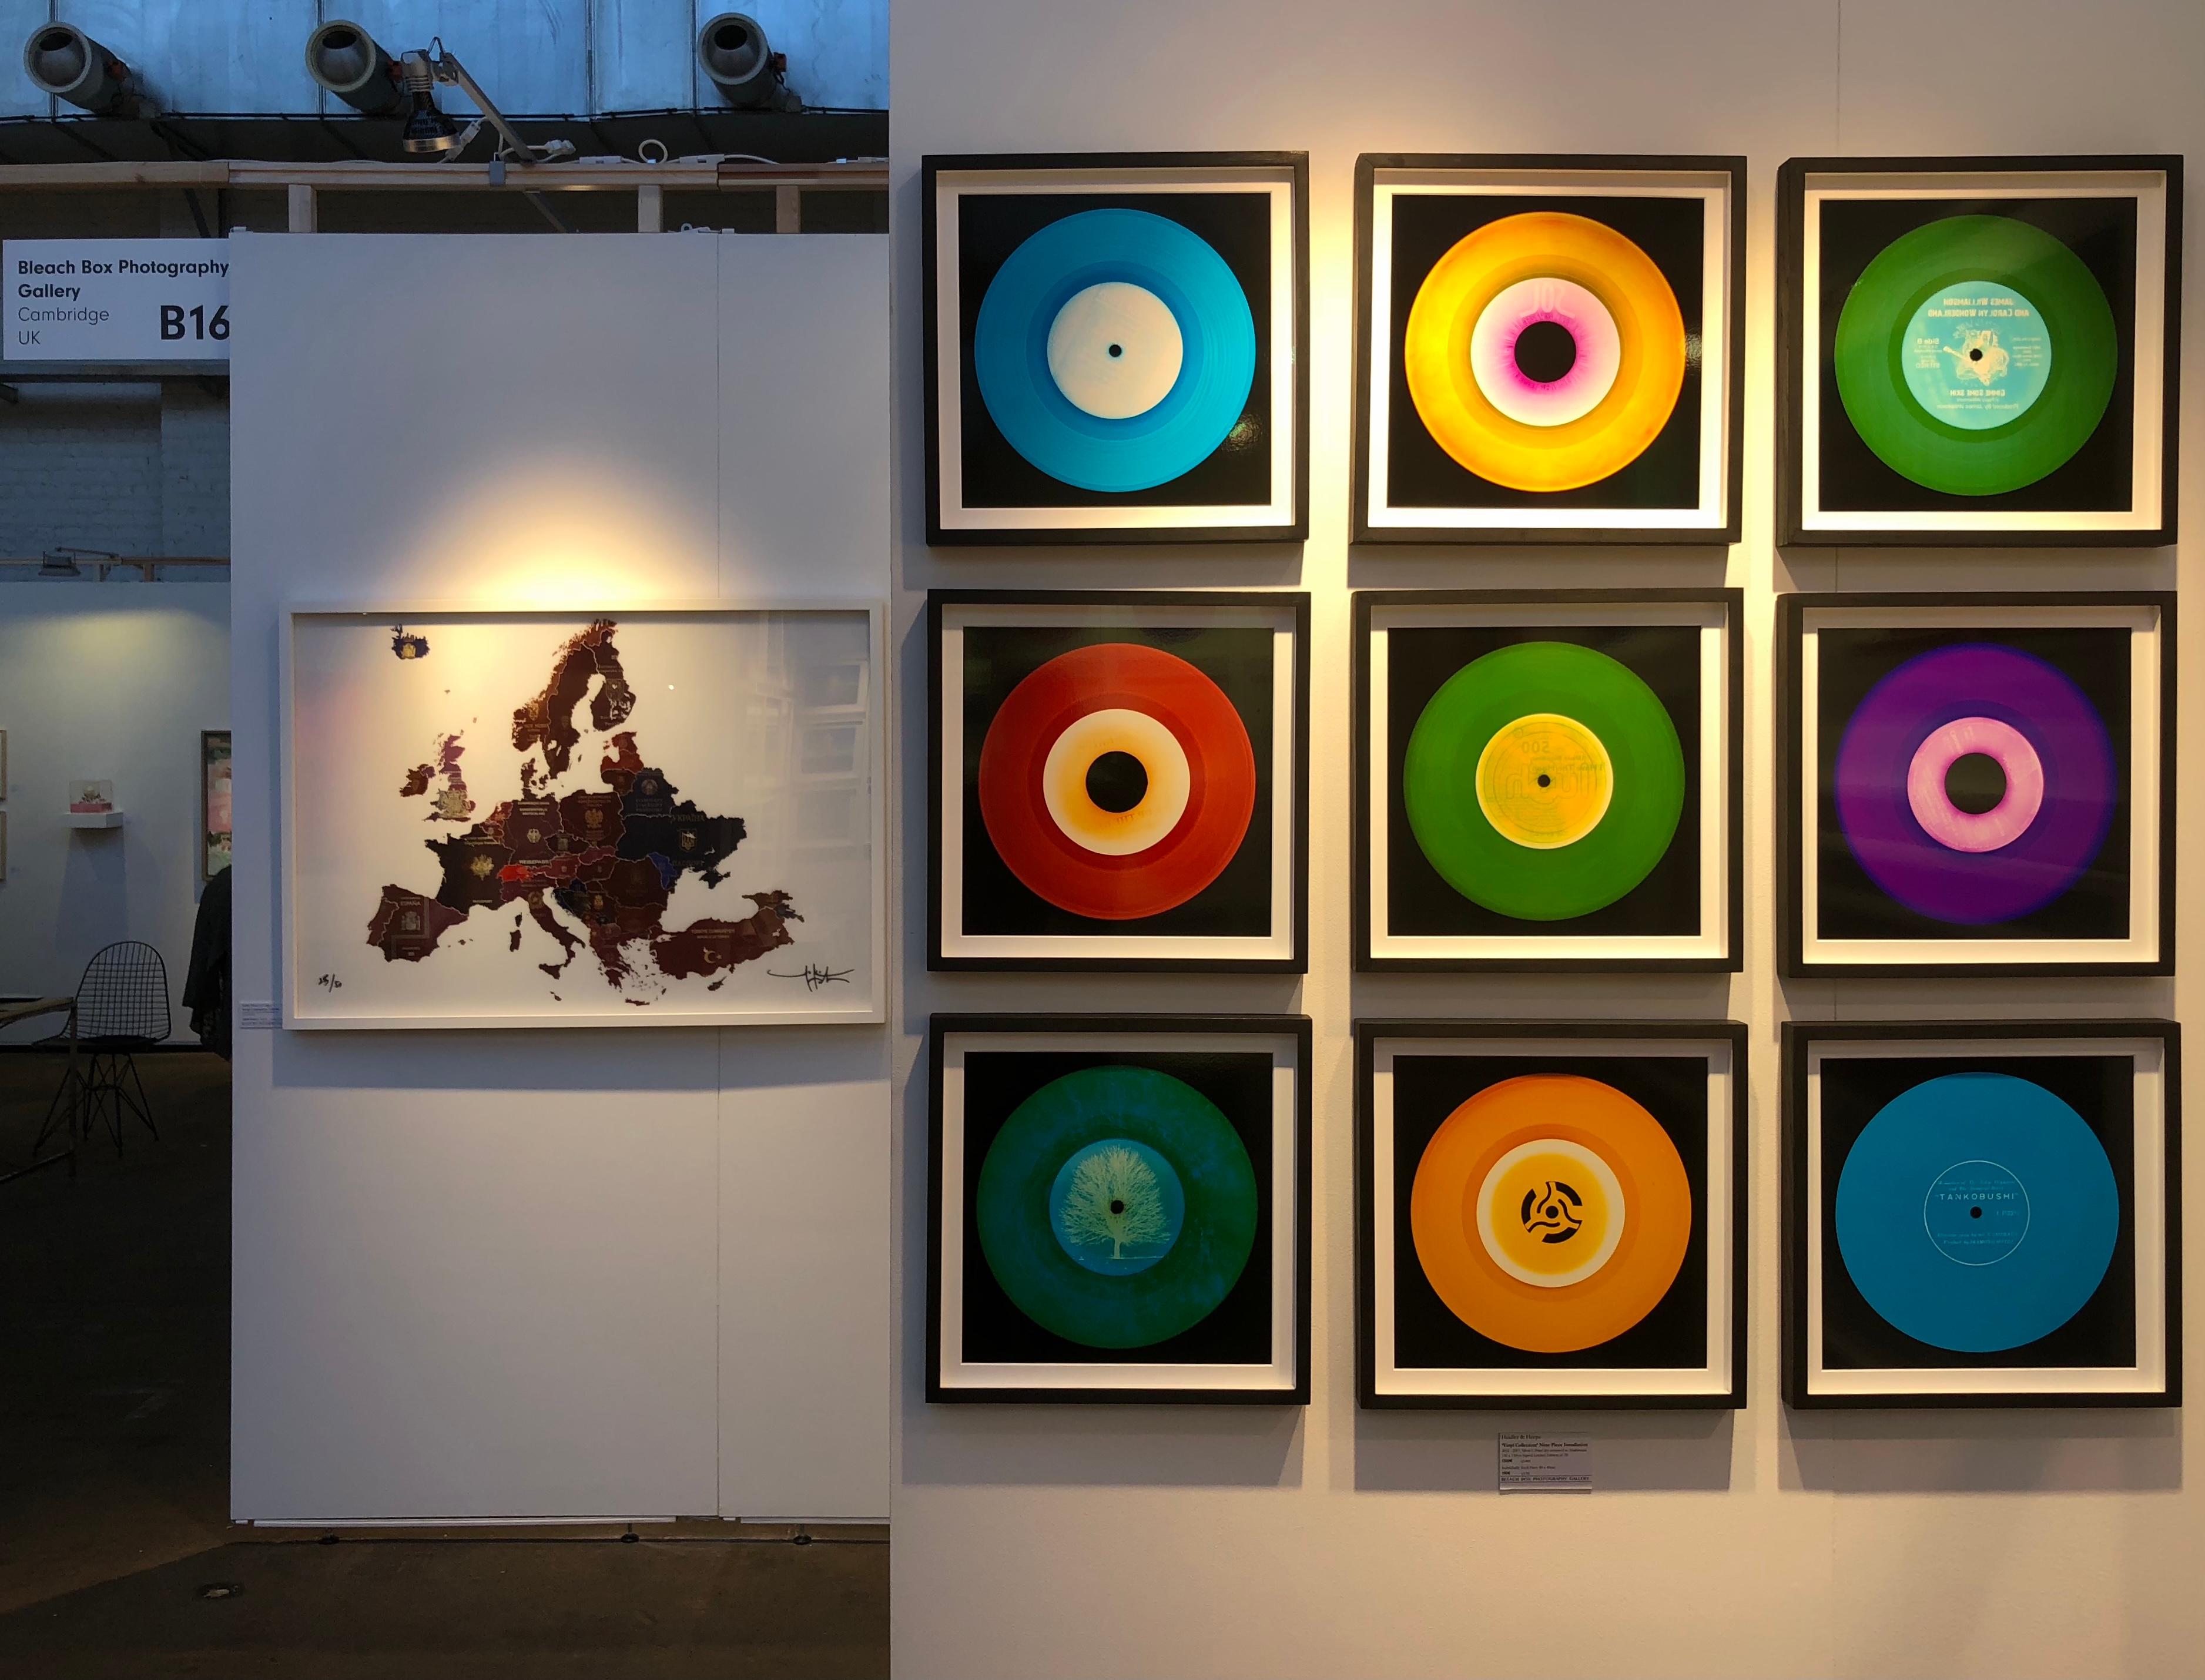 Heidler & Heeps Vinyl Collection Twenty-One Piece Rainbow Installation.
Acclaimed contemporary photographers, Richard Heeps and Natasha Heidler have collaborated to make this beautifully mesmerising collection. A celebration of the vinyl record and